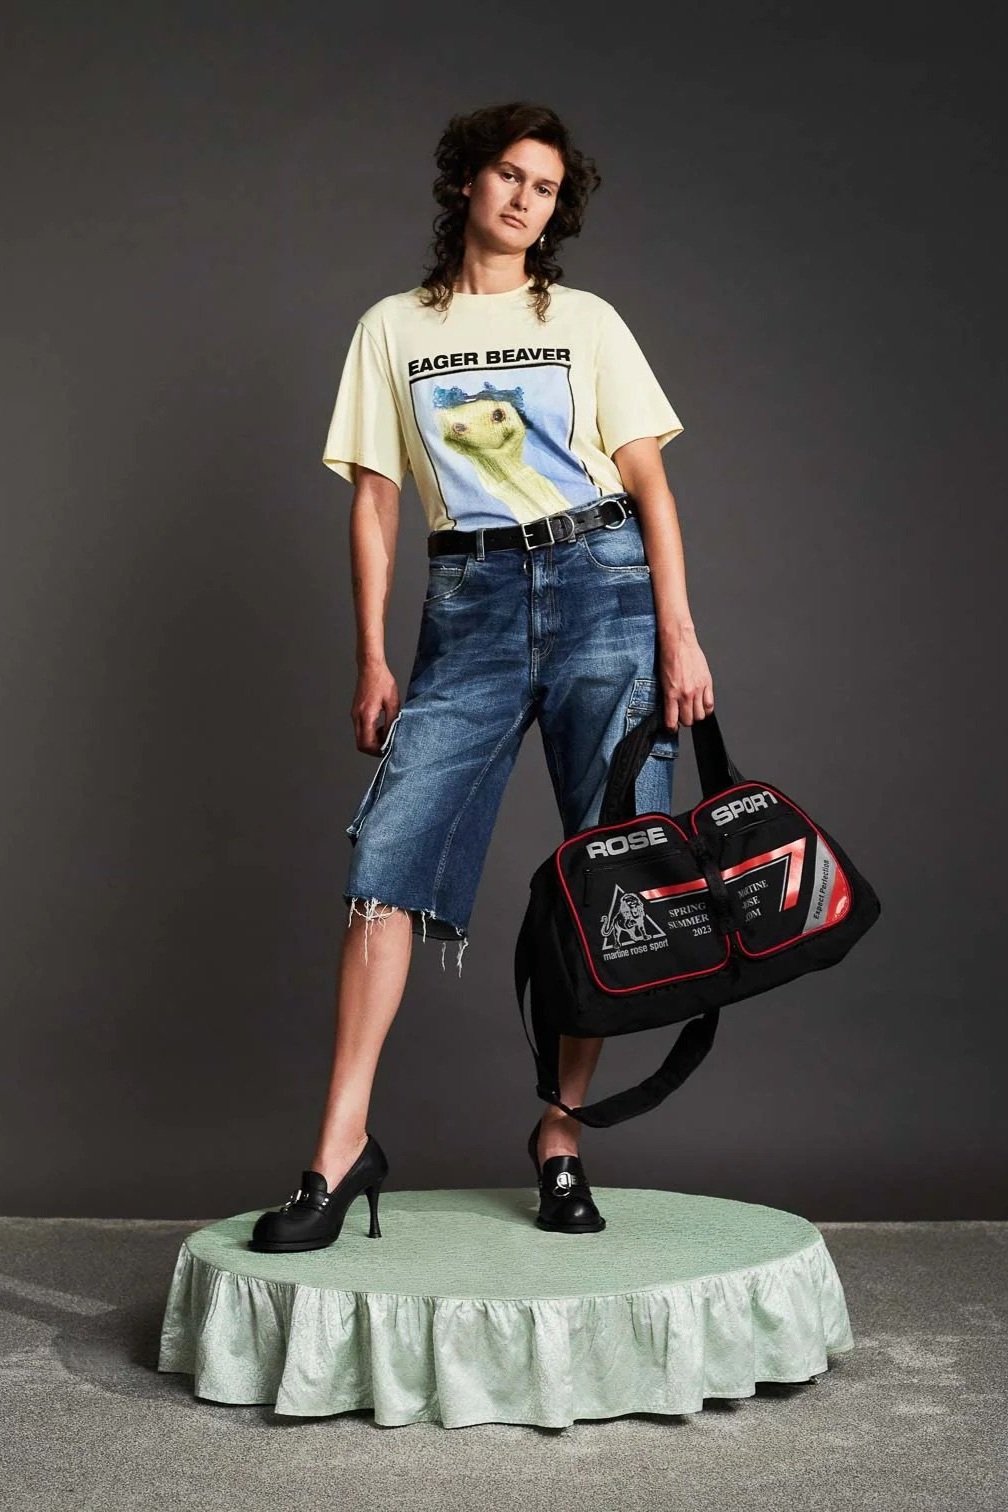 Martine Rose Classic T-Shirt — SLOW WAVES